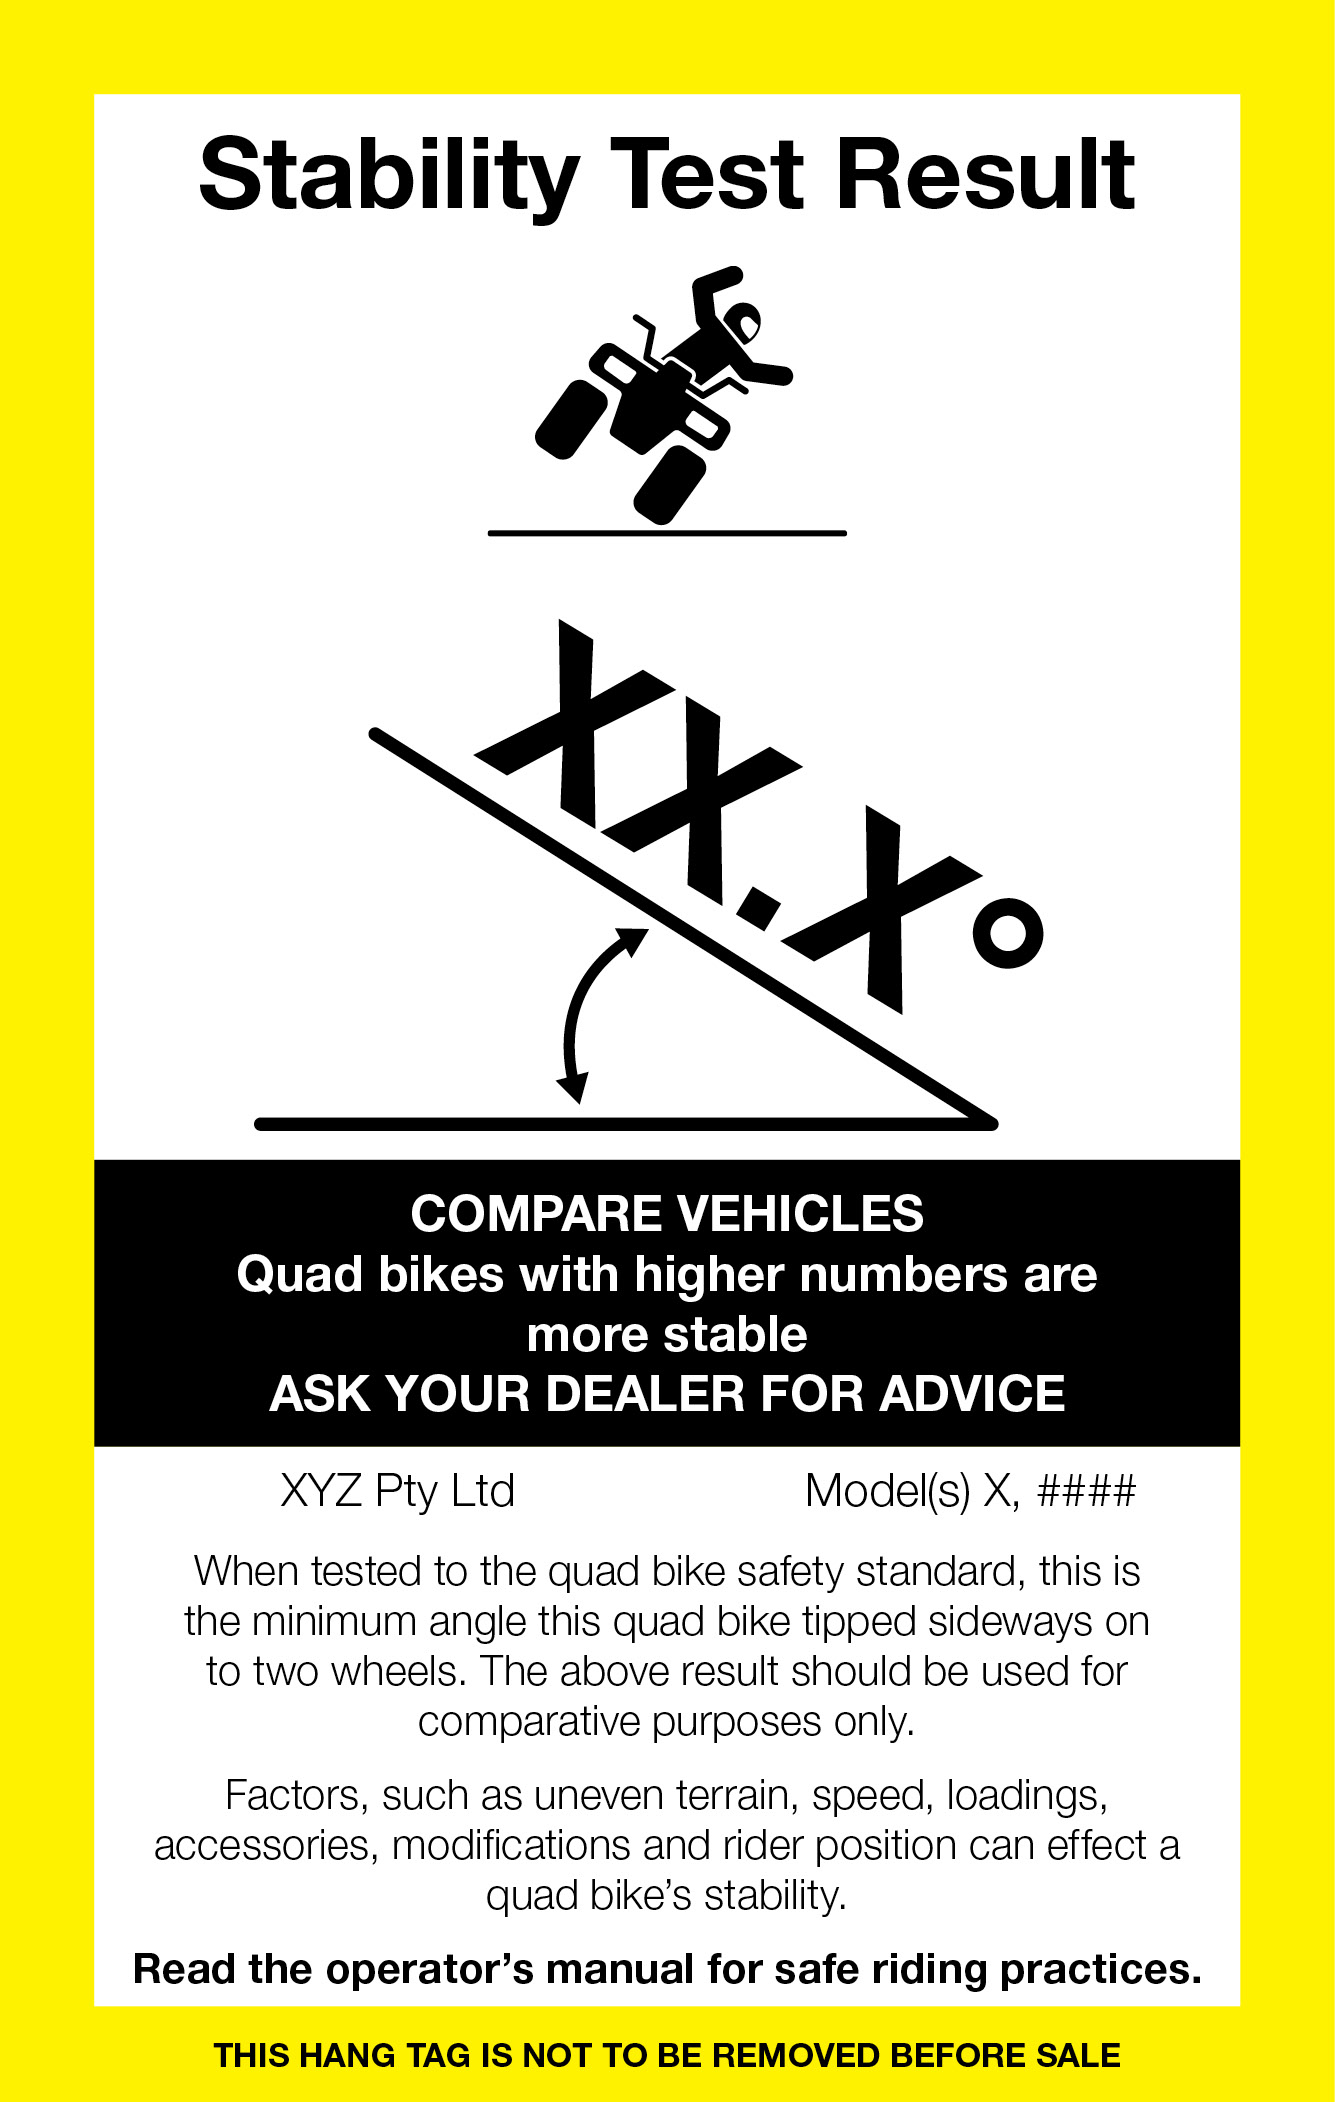 Rectangular hang tag with yellow border describing: Stability Test Result. Compare vehicles - quad bikes with higher numbers are more stable. Ask your dealer for advice. When tested to the quad bike safety standard, this is the minimum angle this quad bike tipped sideways on to two wheels. The above result should be used for comparative purposes only. Factors, such as uneven terrain, speed, loadings, accessories, modifications and rider position can effect a quad bike's stability. Read the operator's manual for safe riding practices. This hang tag is not to be removed before sale.